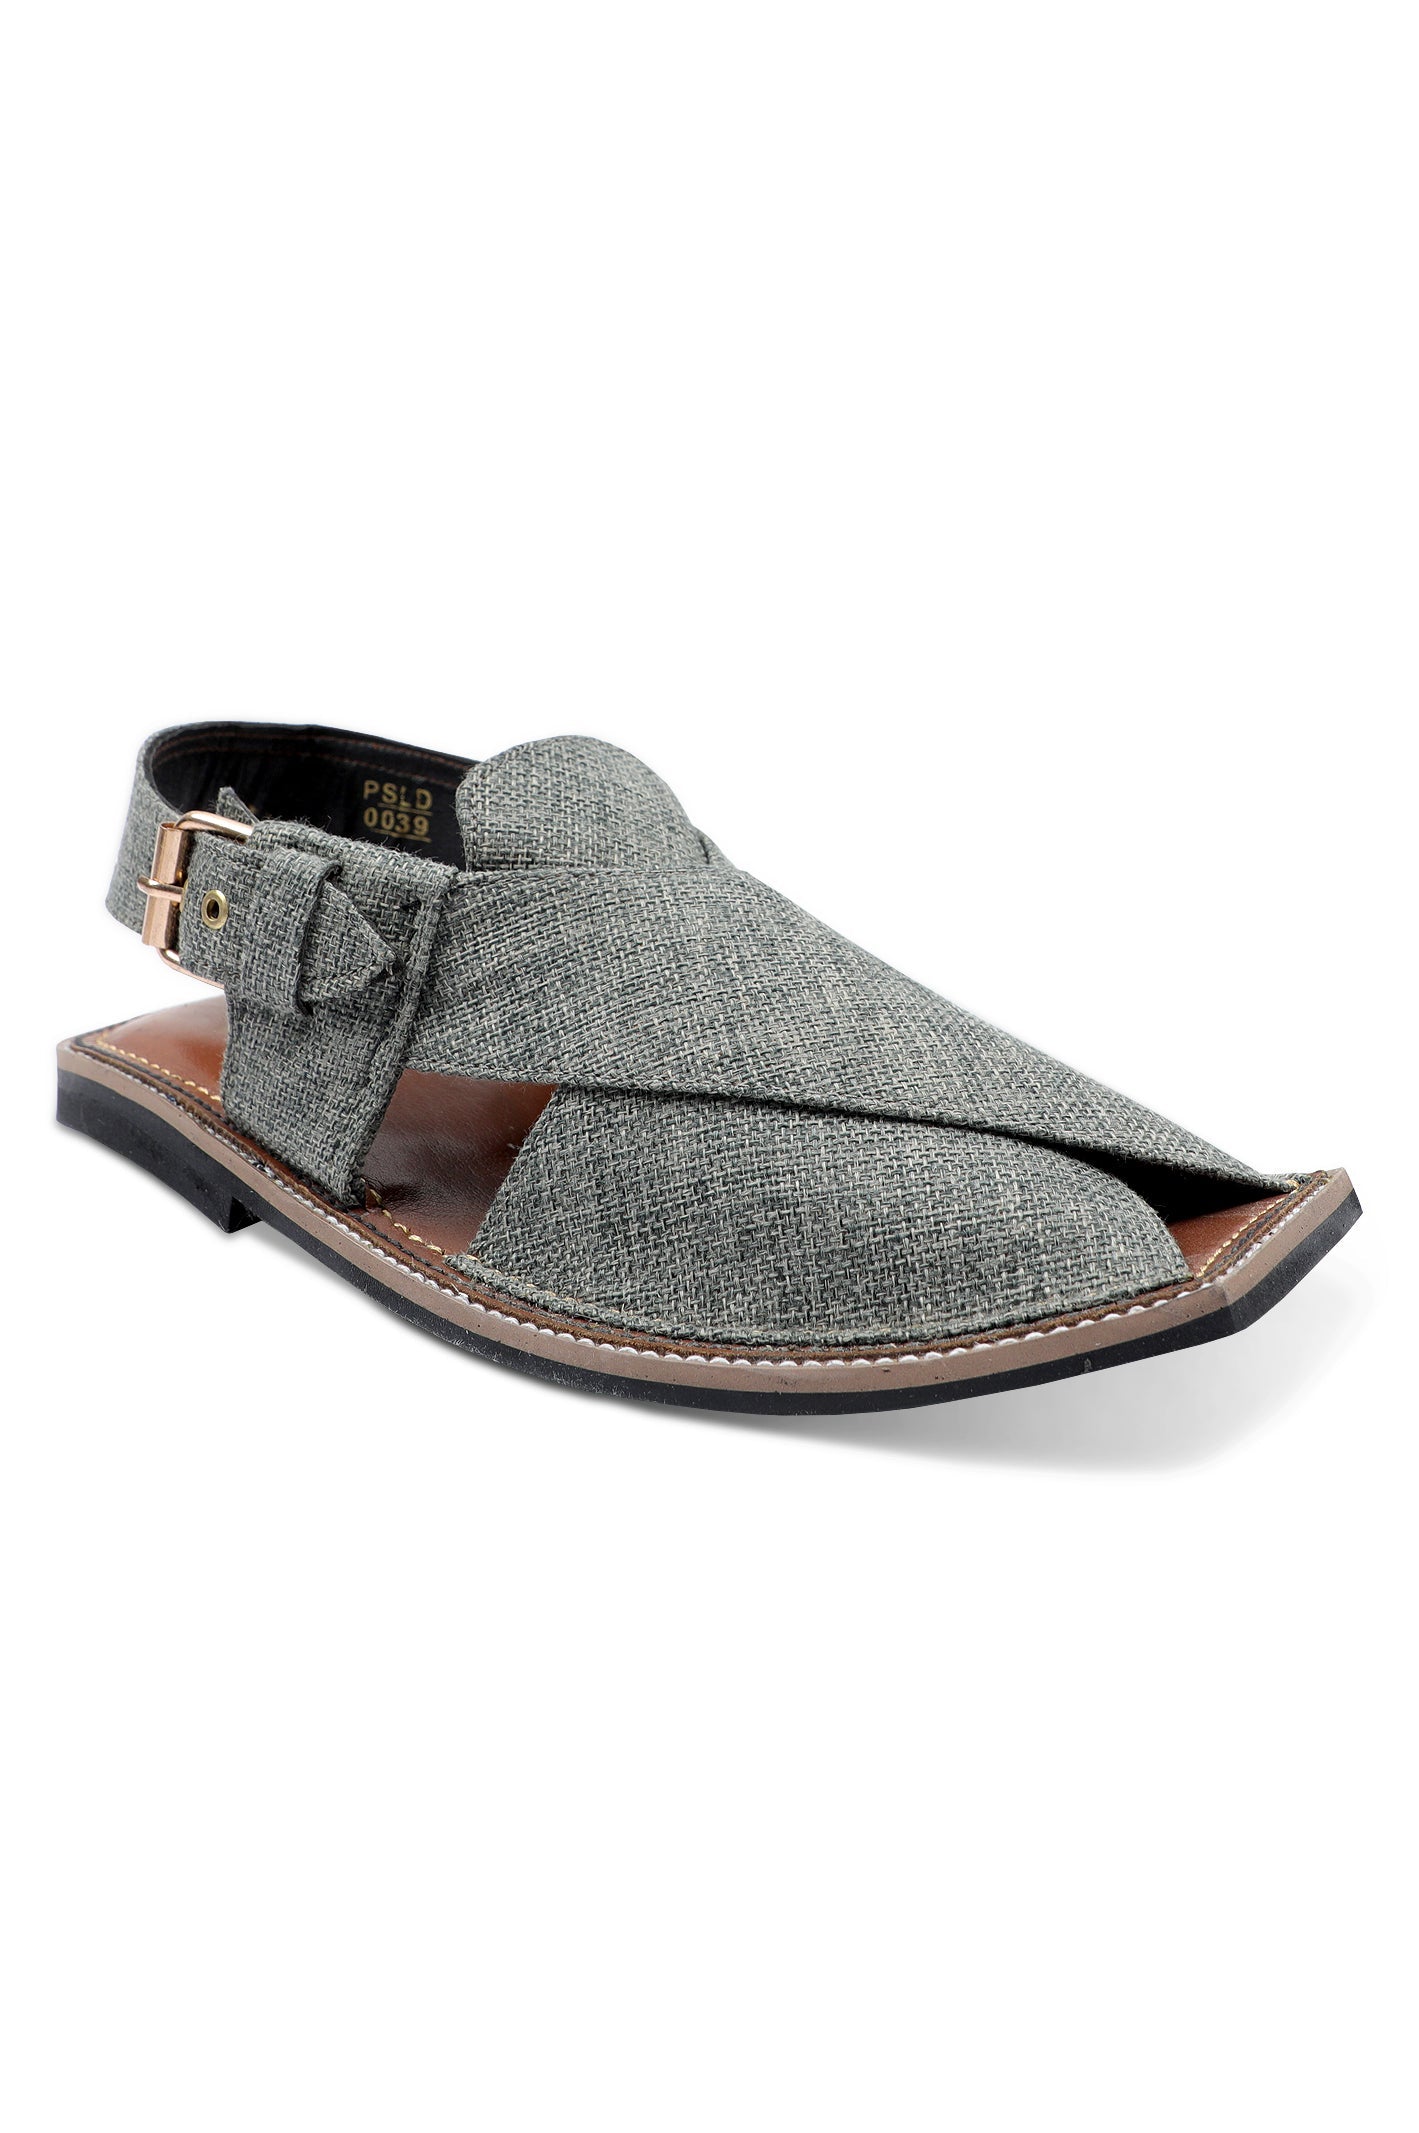 French Emporio Men Sandals SKU: PSLD-0039-GREY - Diners